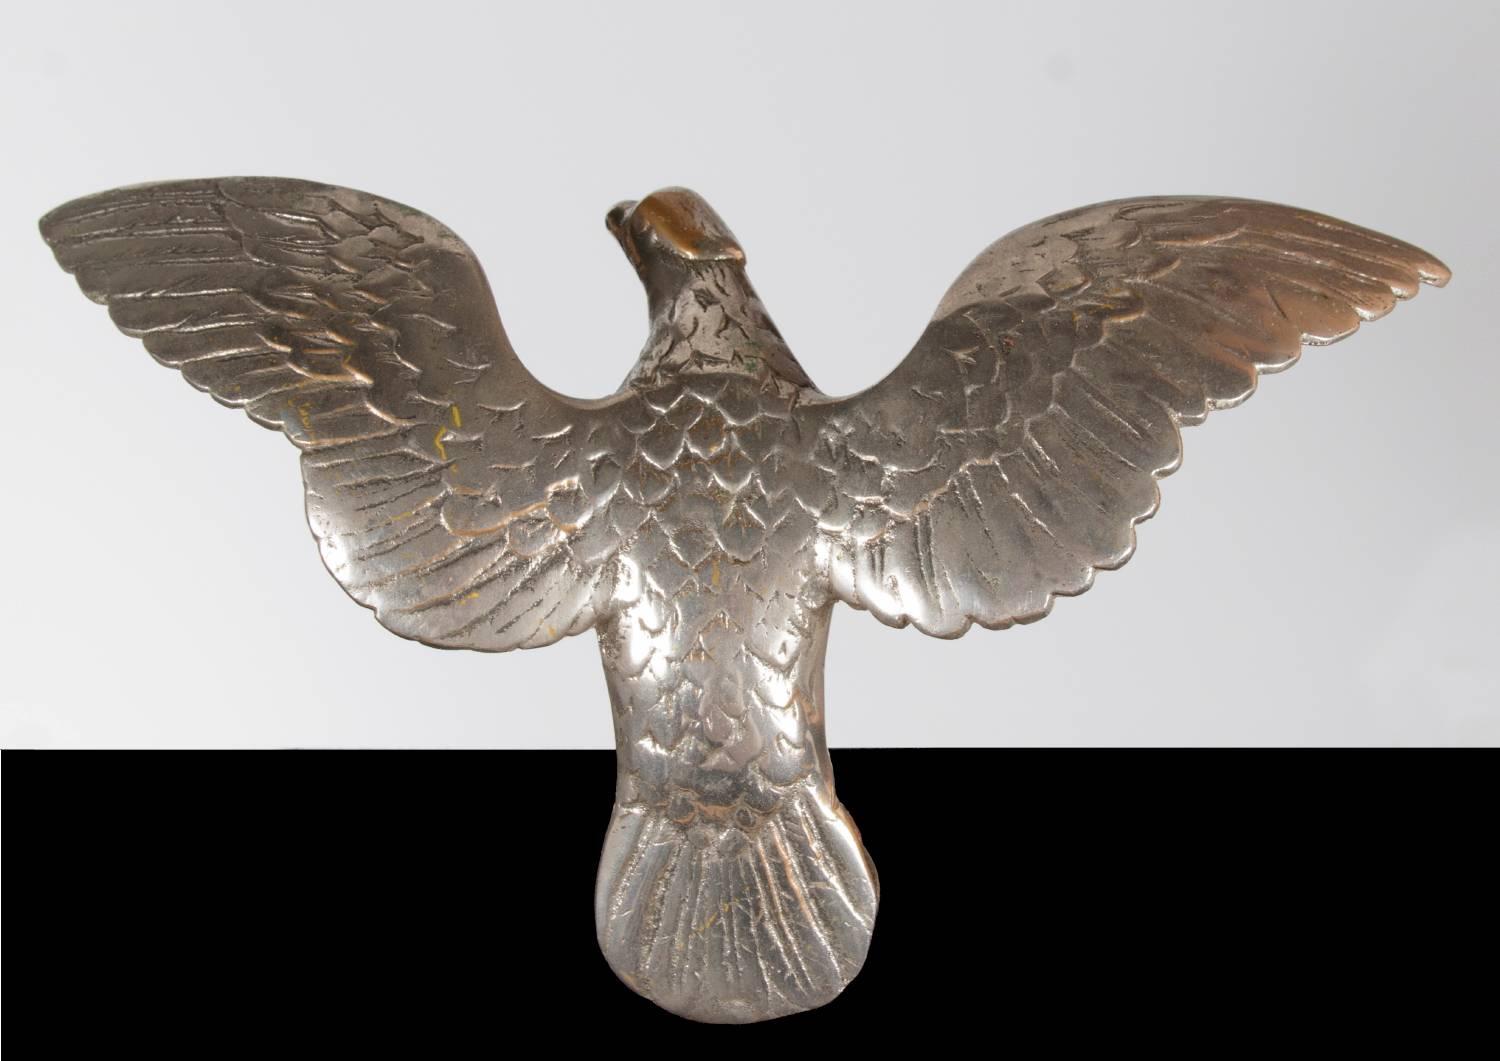 Eagle flag pole topper, made of iron and nickel-plated. The form isn't unconventional by any means, as small eagles were a popular form for flag pole finials, but the pose seen here is uncommon, with wings outstretched and slightly above the head,